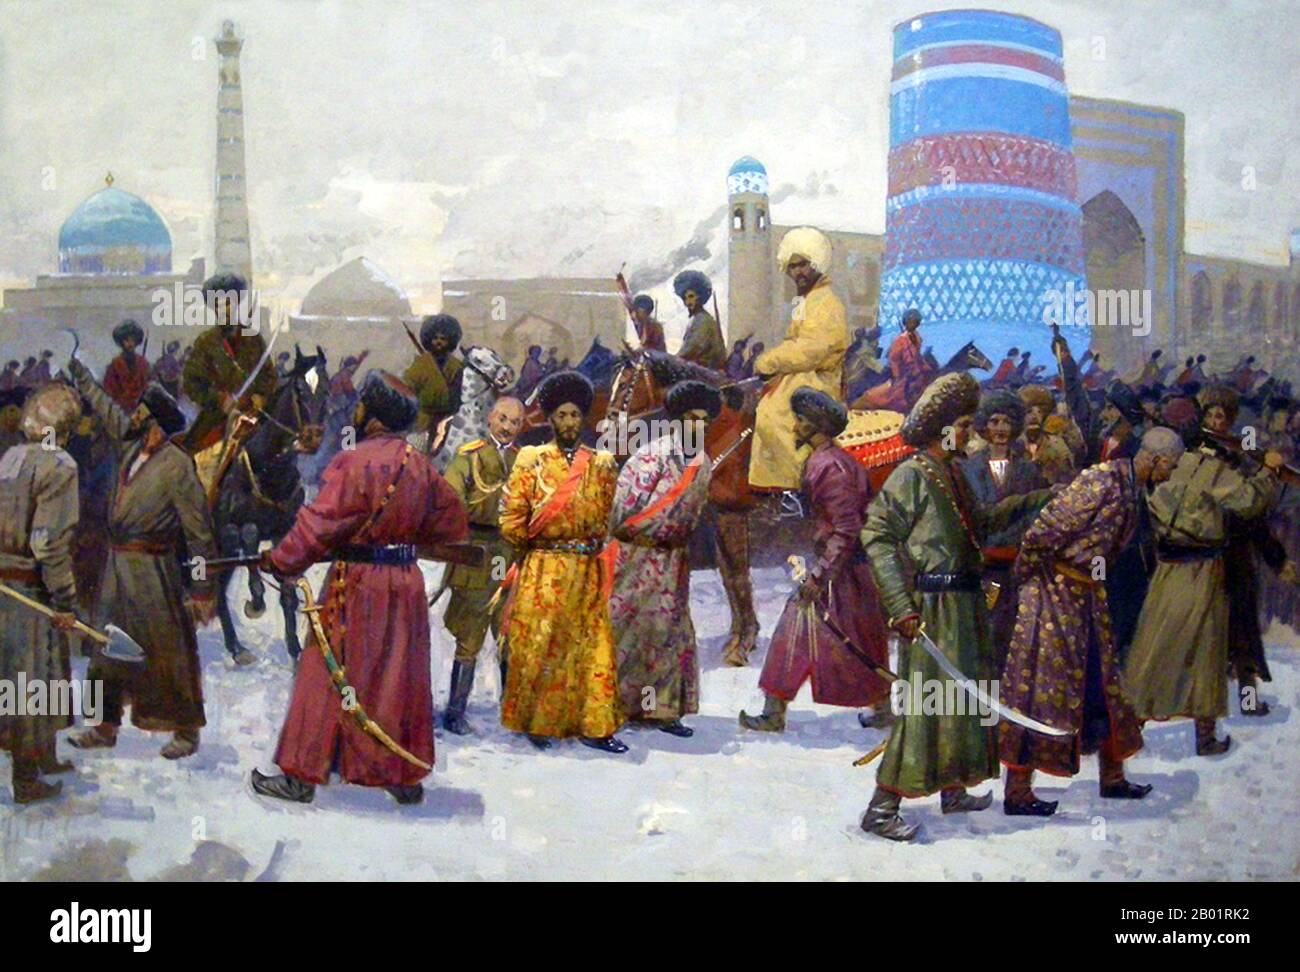 Uzbekistan: The 1916 Rising in Khiva. Oil on canvas painting, c. 1918.  During the First World War the Muslim exemption from conscription was removed by the Russians, sparking the Central Asian Revolt of 1916. When the Russian Revolution of 1917 occurred, a provisional Government of Jadid Reformers, also known as the Turkestan Muslim Council met in Kokand and declared Turkestan's autonomy.  This new government was quickly crushed by the forces of the Tashkent Soviet, and the semi-autonomous states of Bukhara and Khiva were also invaded. The main independence forces were rapidly crushed. Stock Photo